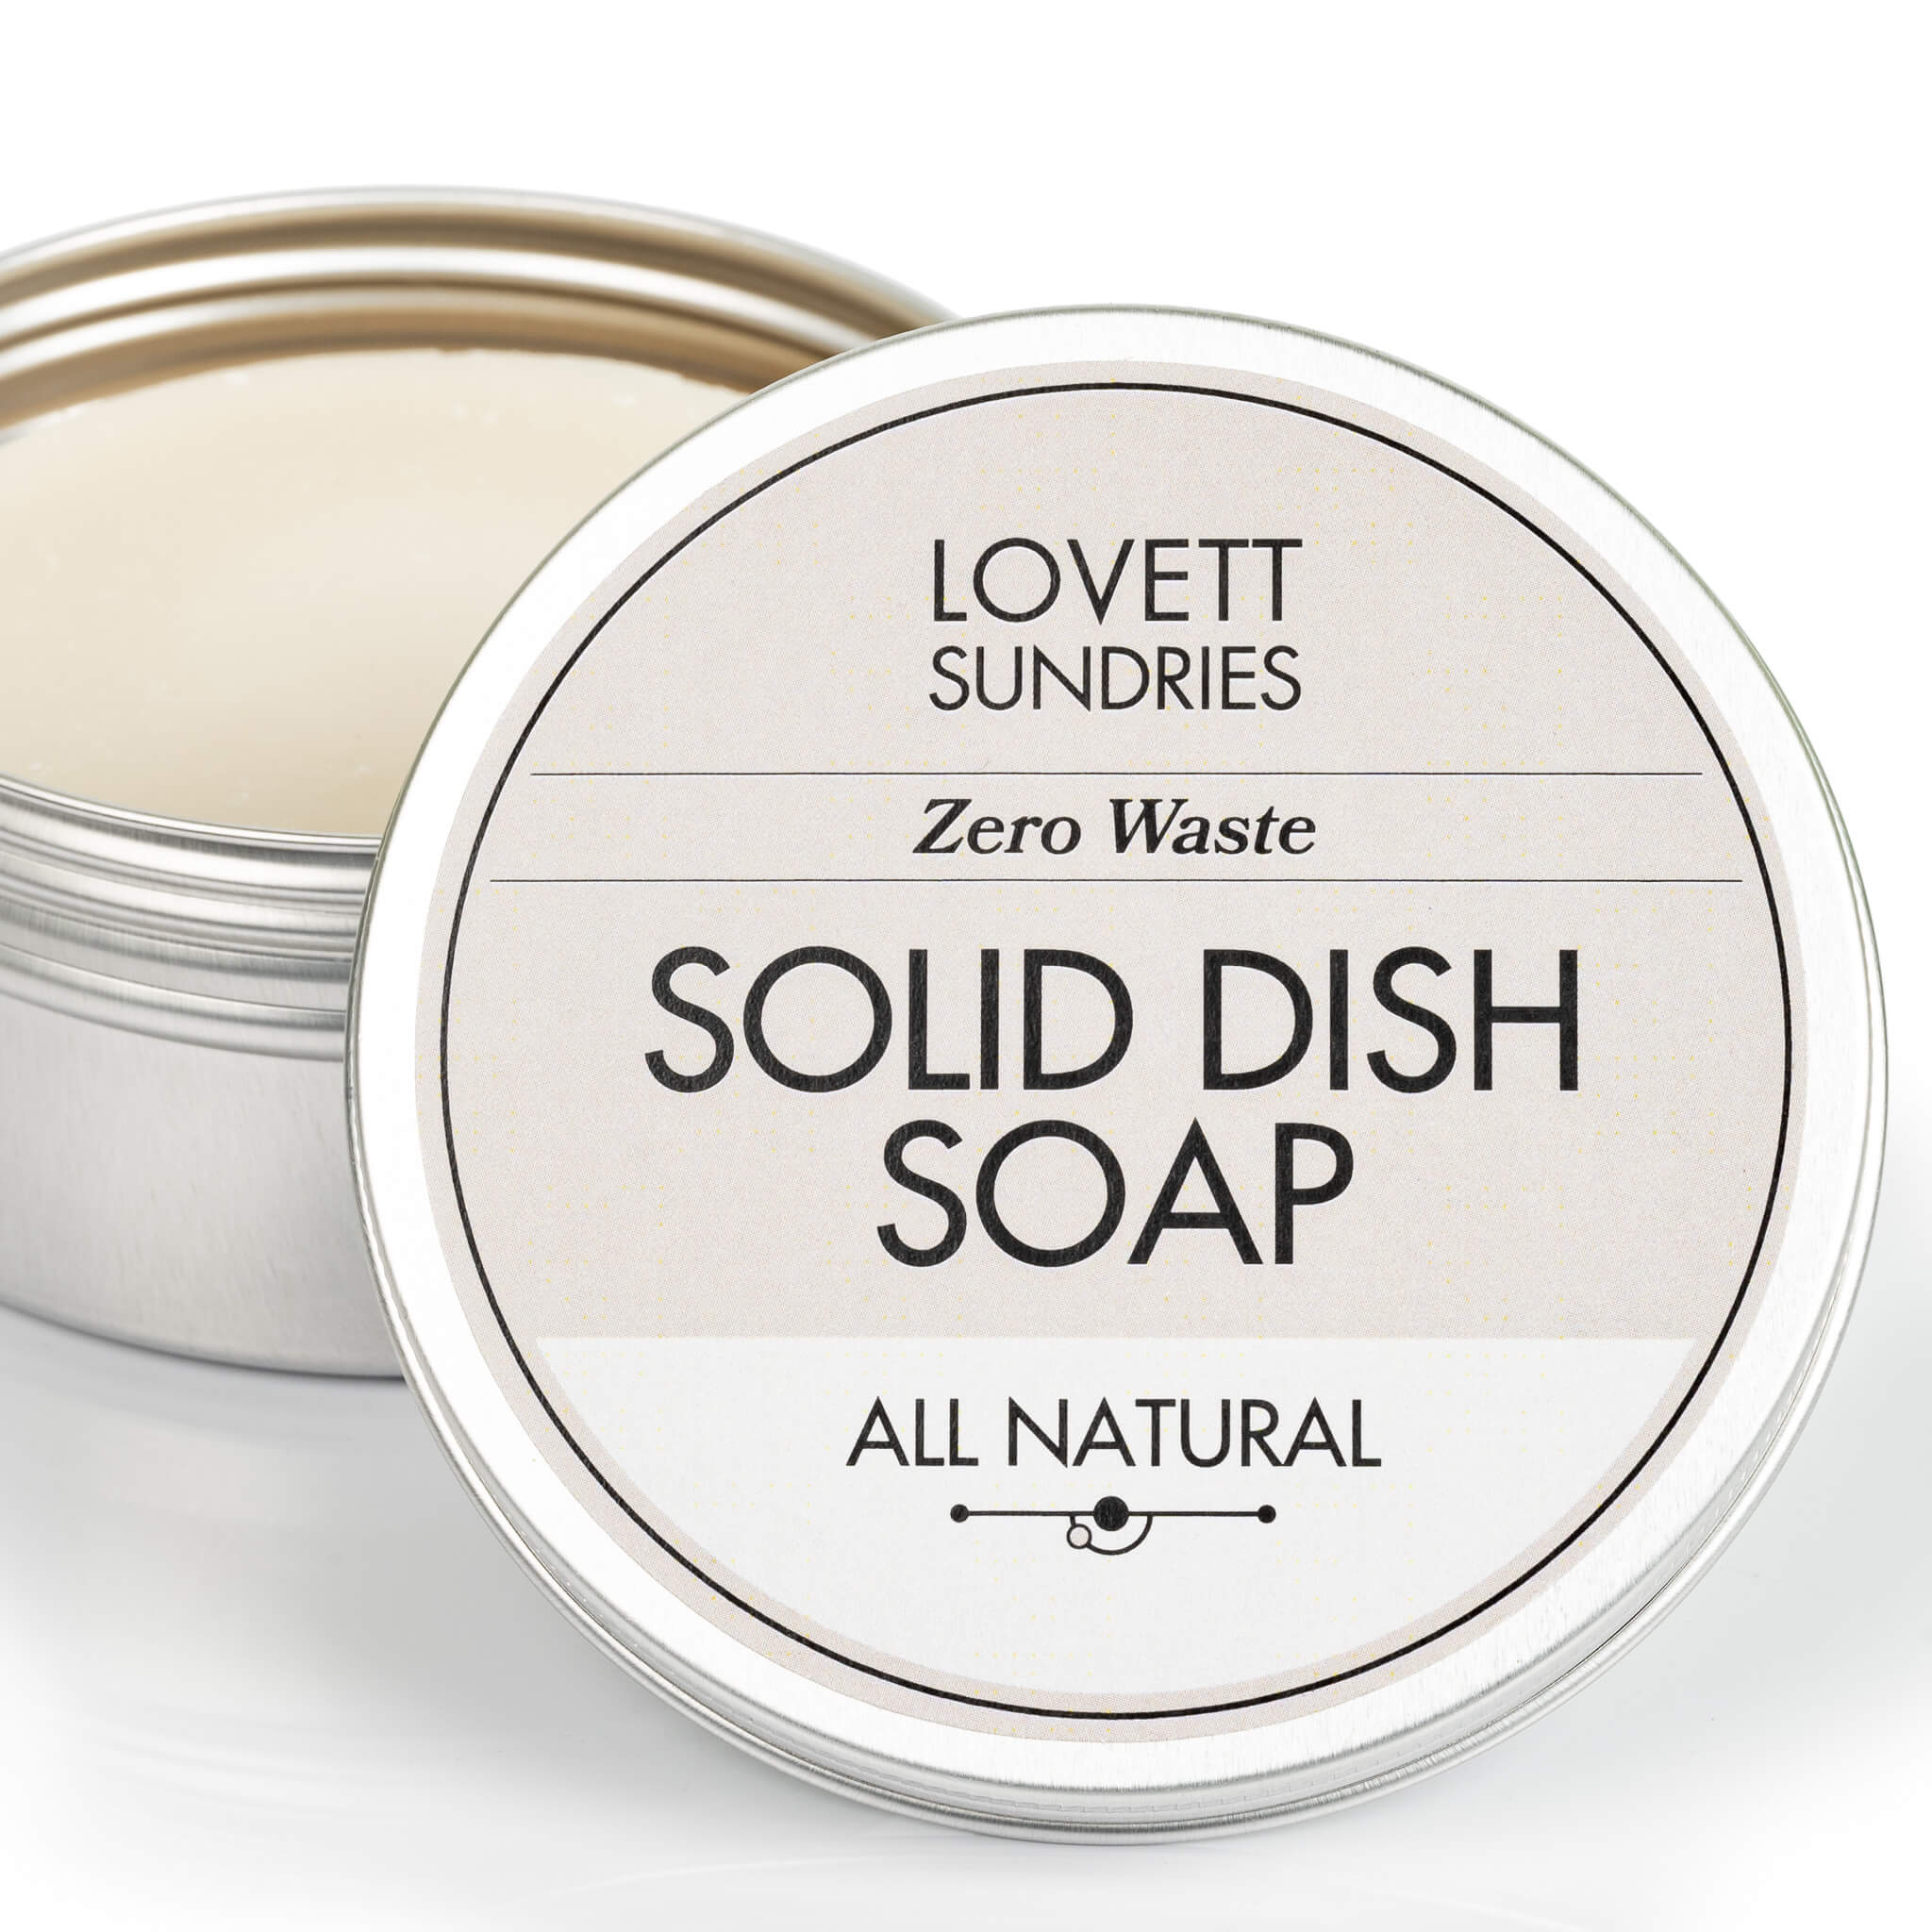 All natural zero waste solid dish soap in a recyclable aluminum tin. 